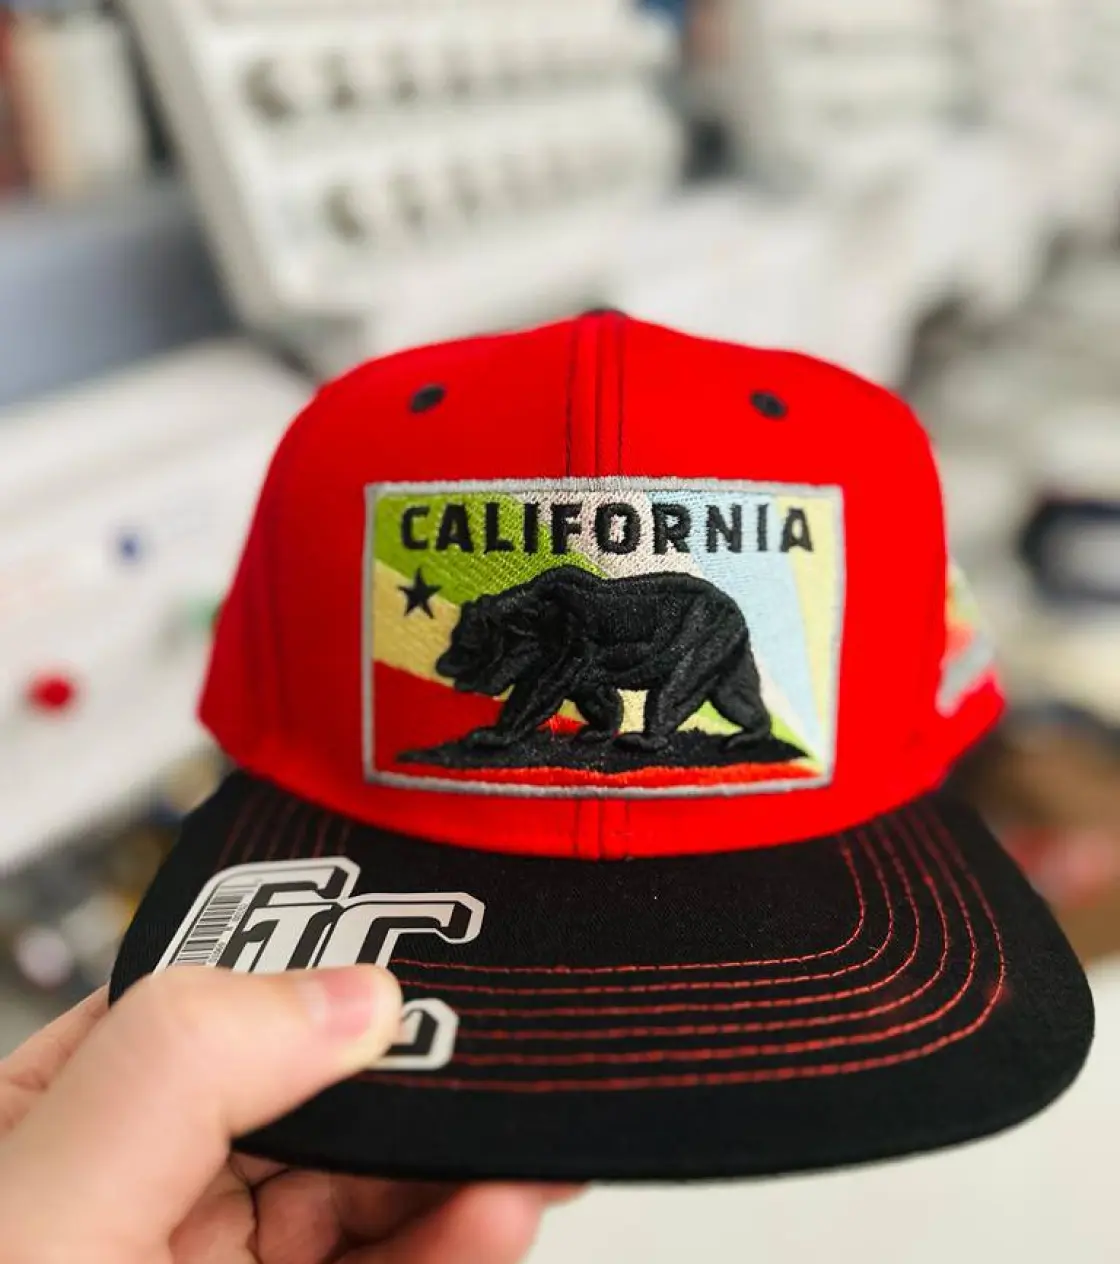 Red hat with California embroidery